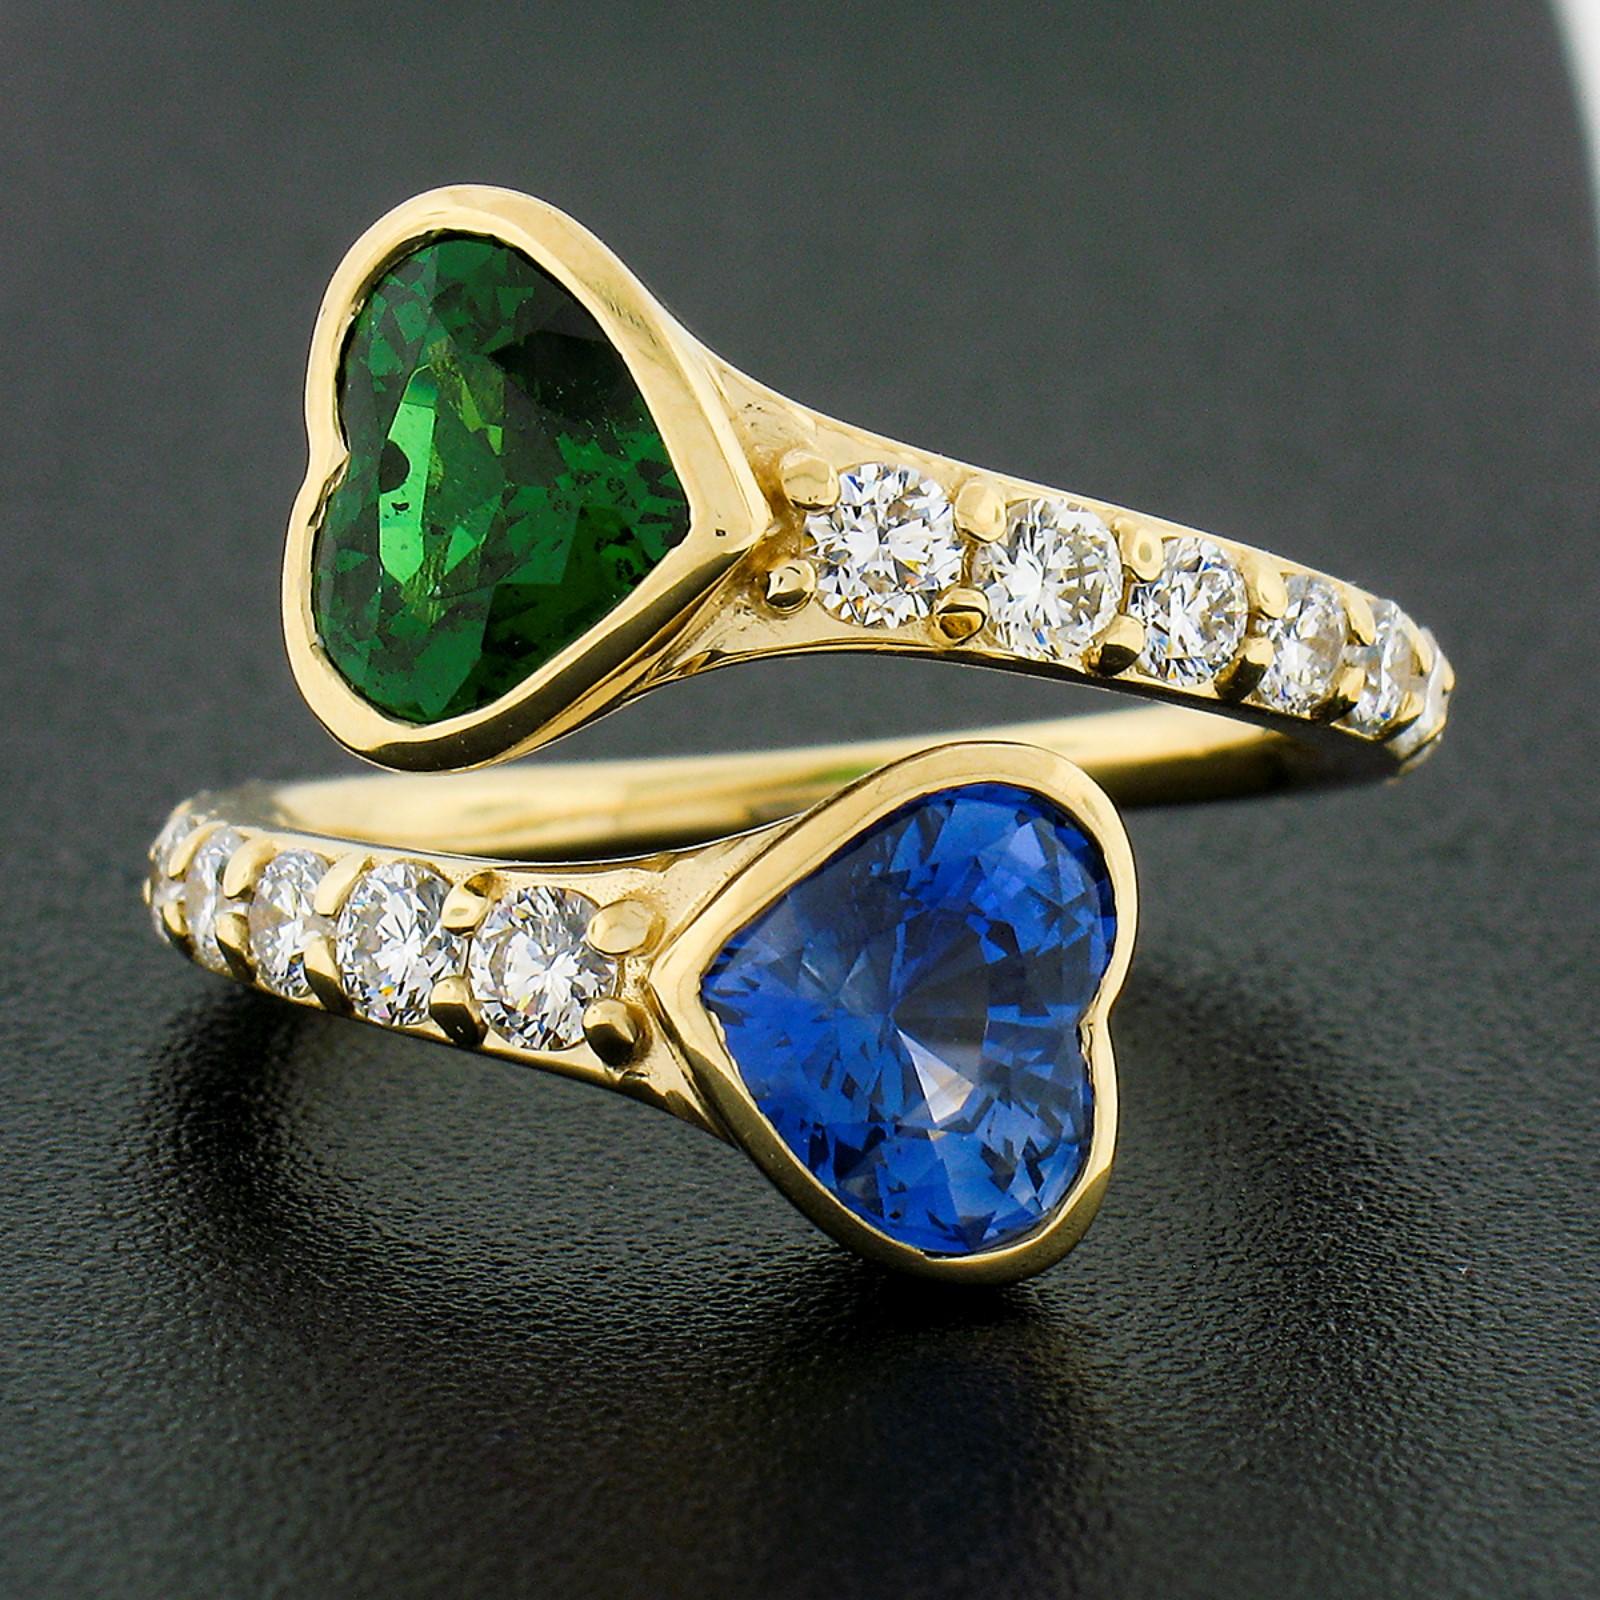 This magnificent and very well made ring is newly crafted in solid 18k yellow gold and features a beautiful bypass design that features a heart brilliant cut sapphire and tsavorite stone, in which both have been certified by GIA. The are both